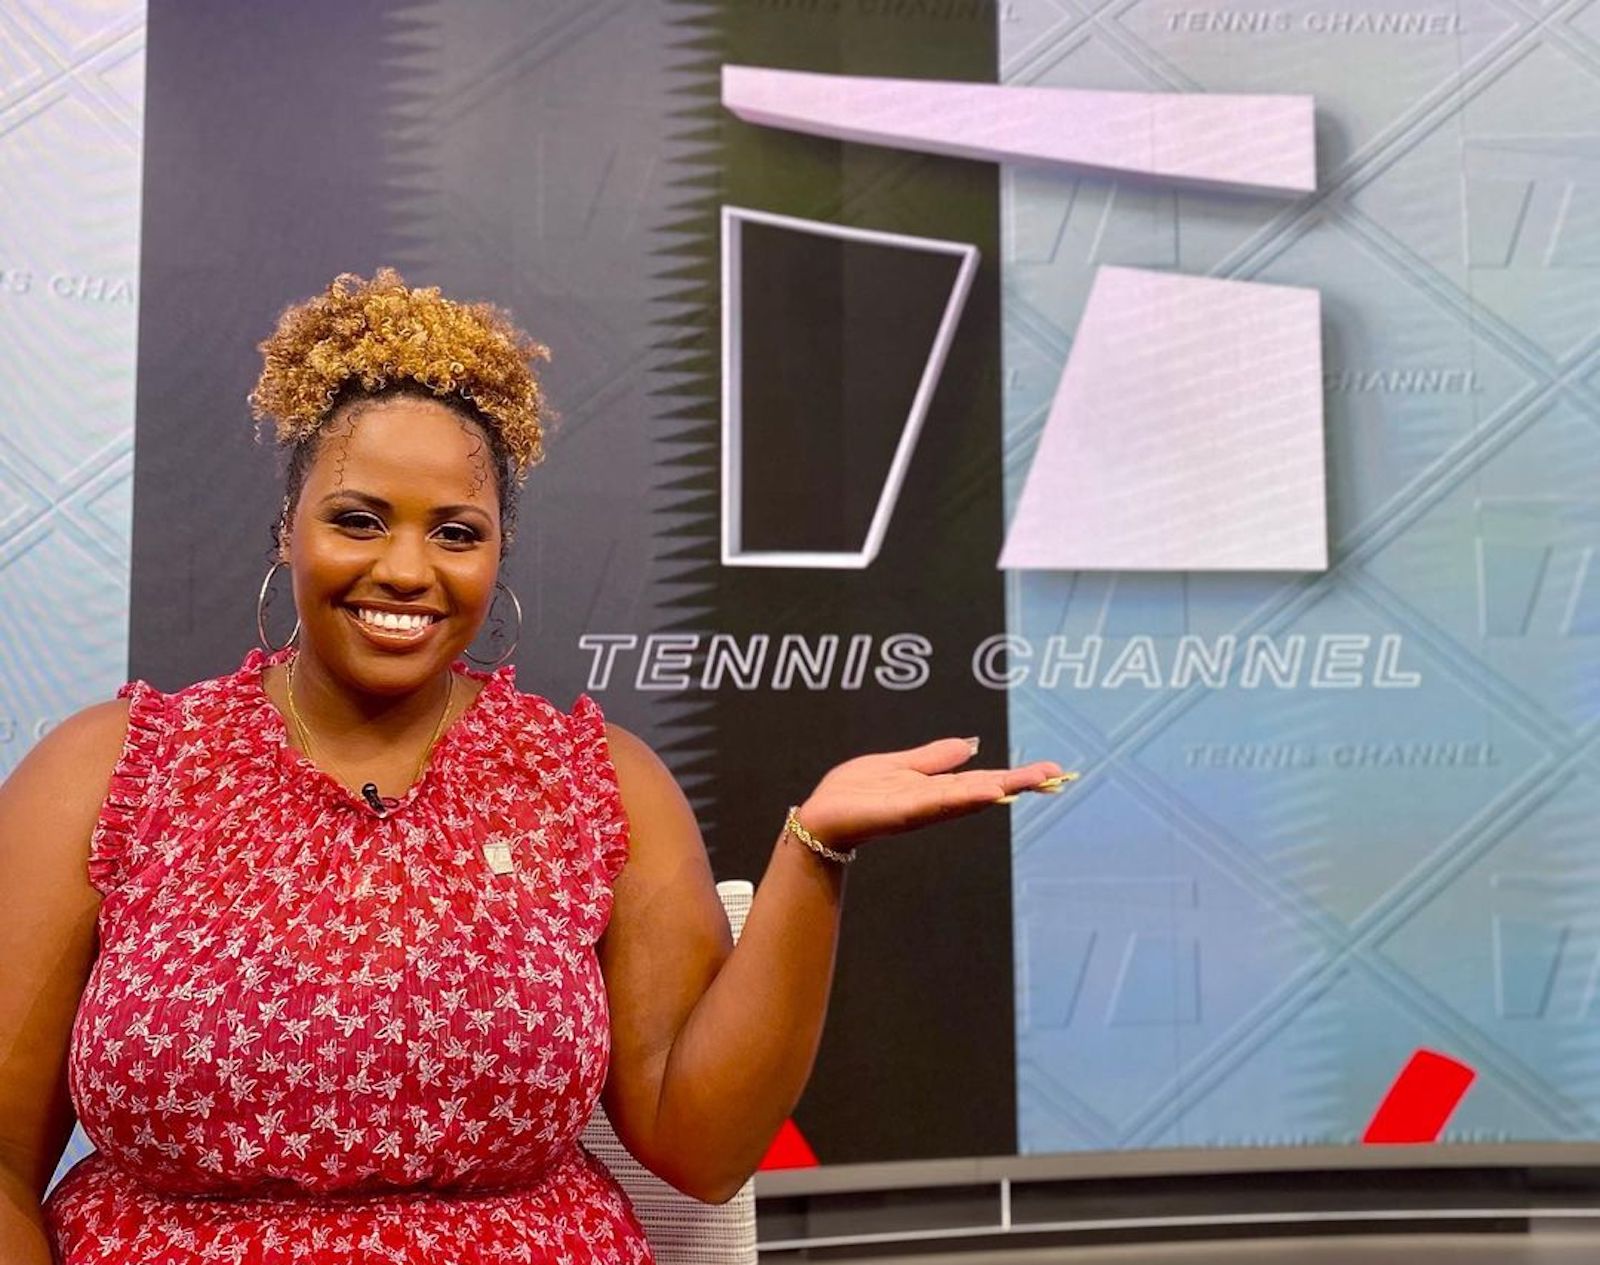 Taylor Townsend is an on-air natural for Tennis Channel